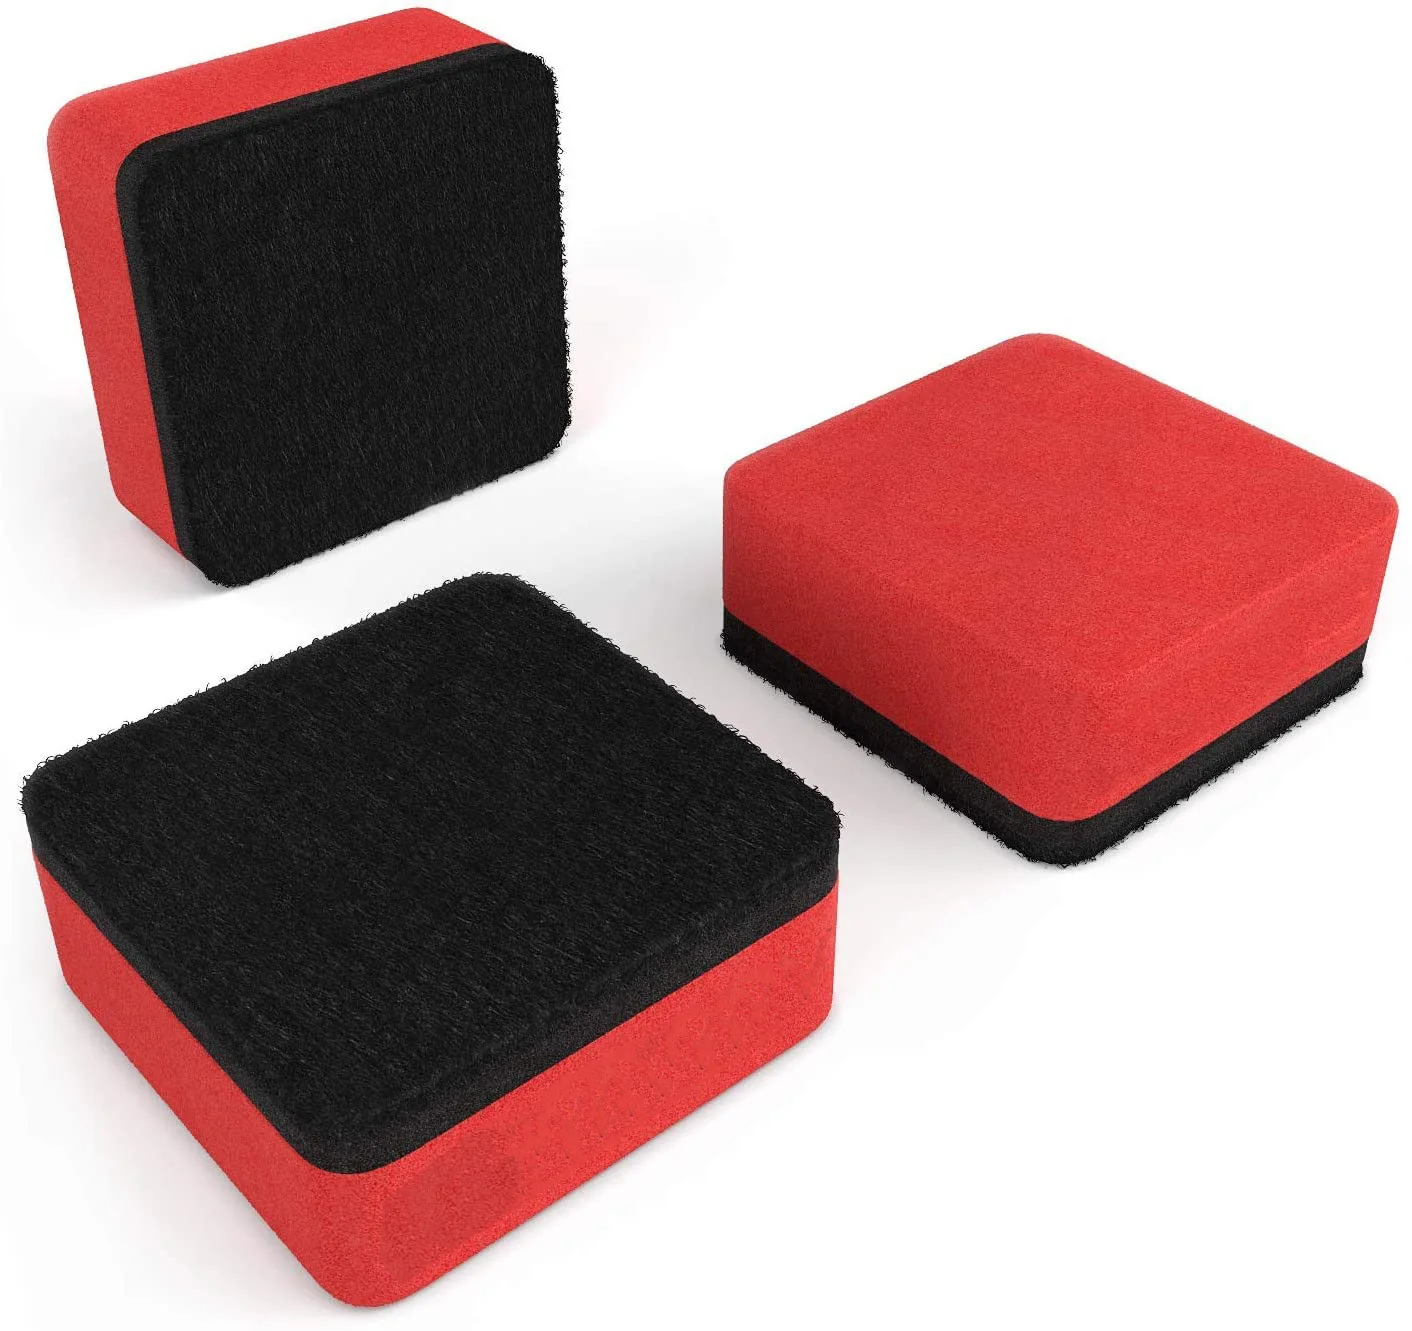 Small Magnetic Whiteboard Dry Erasers, Perfect for the Office, Maison, or Classroom